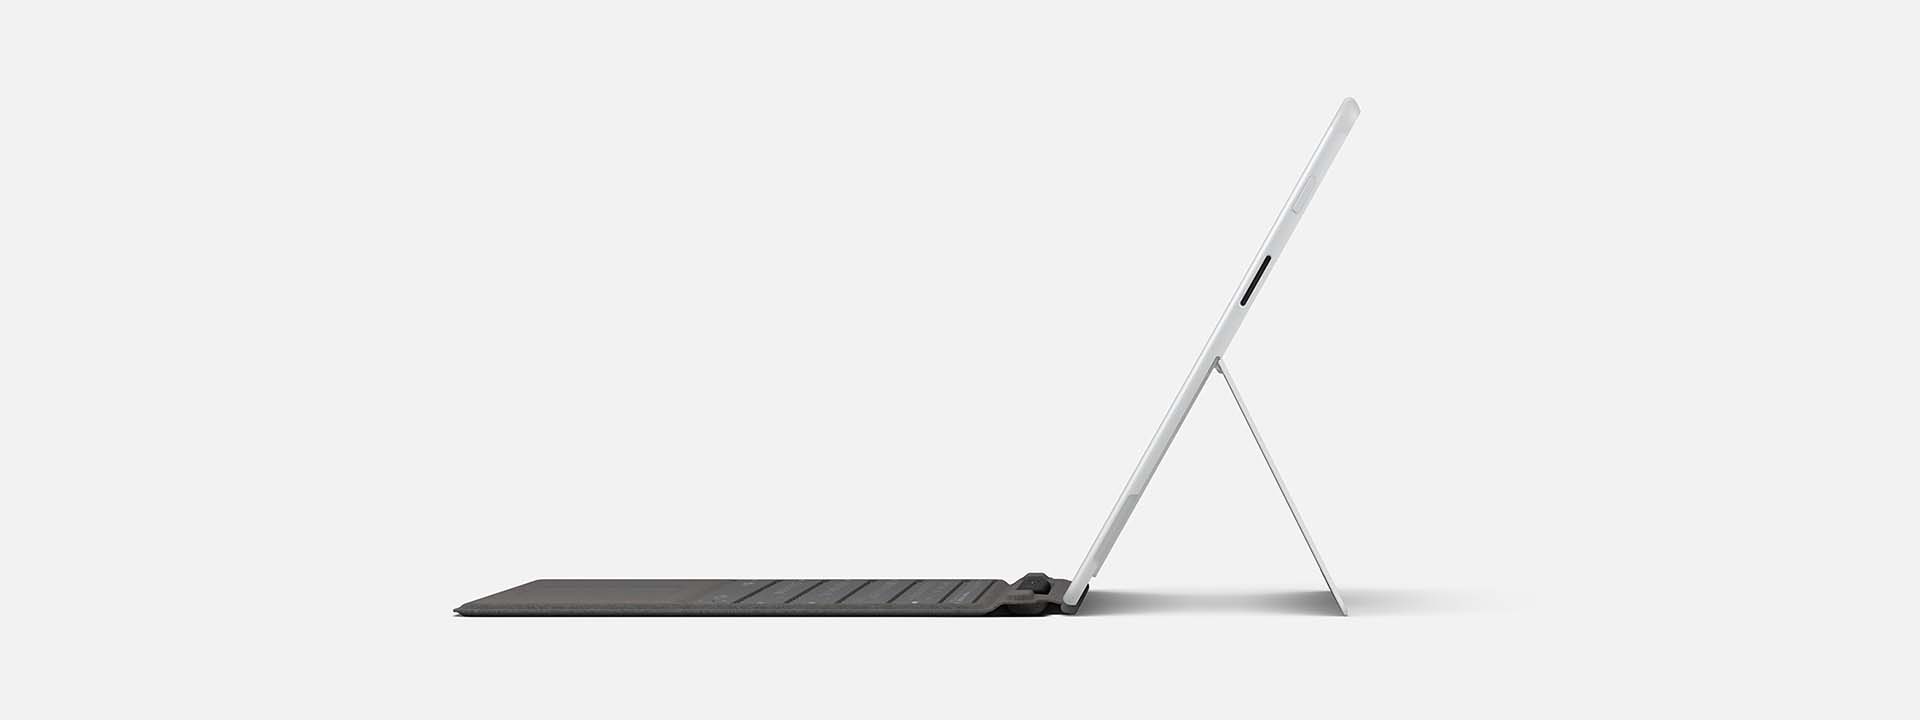 Surface Pro X Ultra-Thin Business Laptop - Microsoft Surface for Business